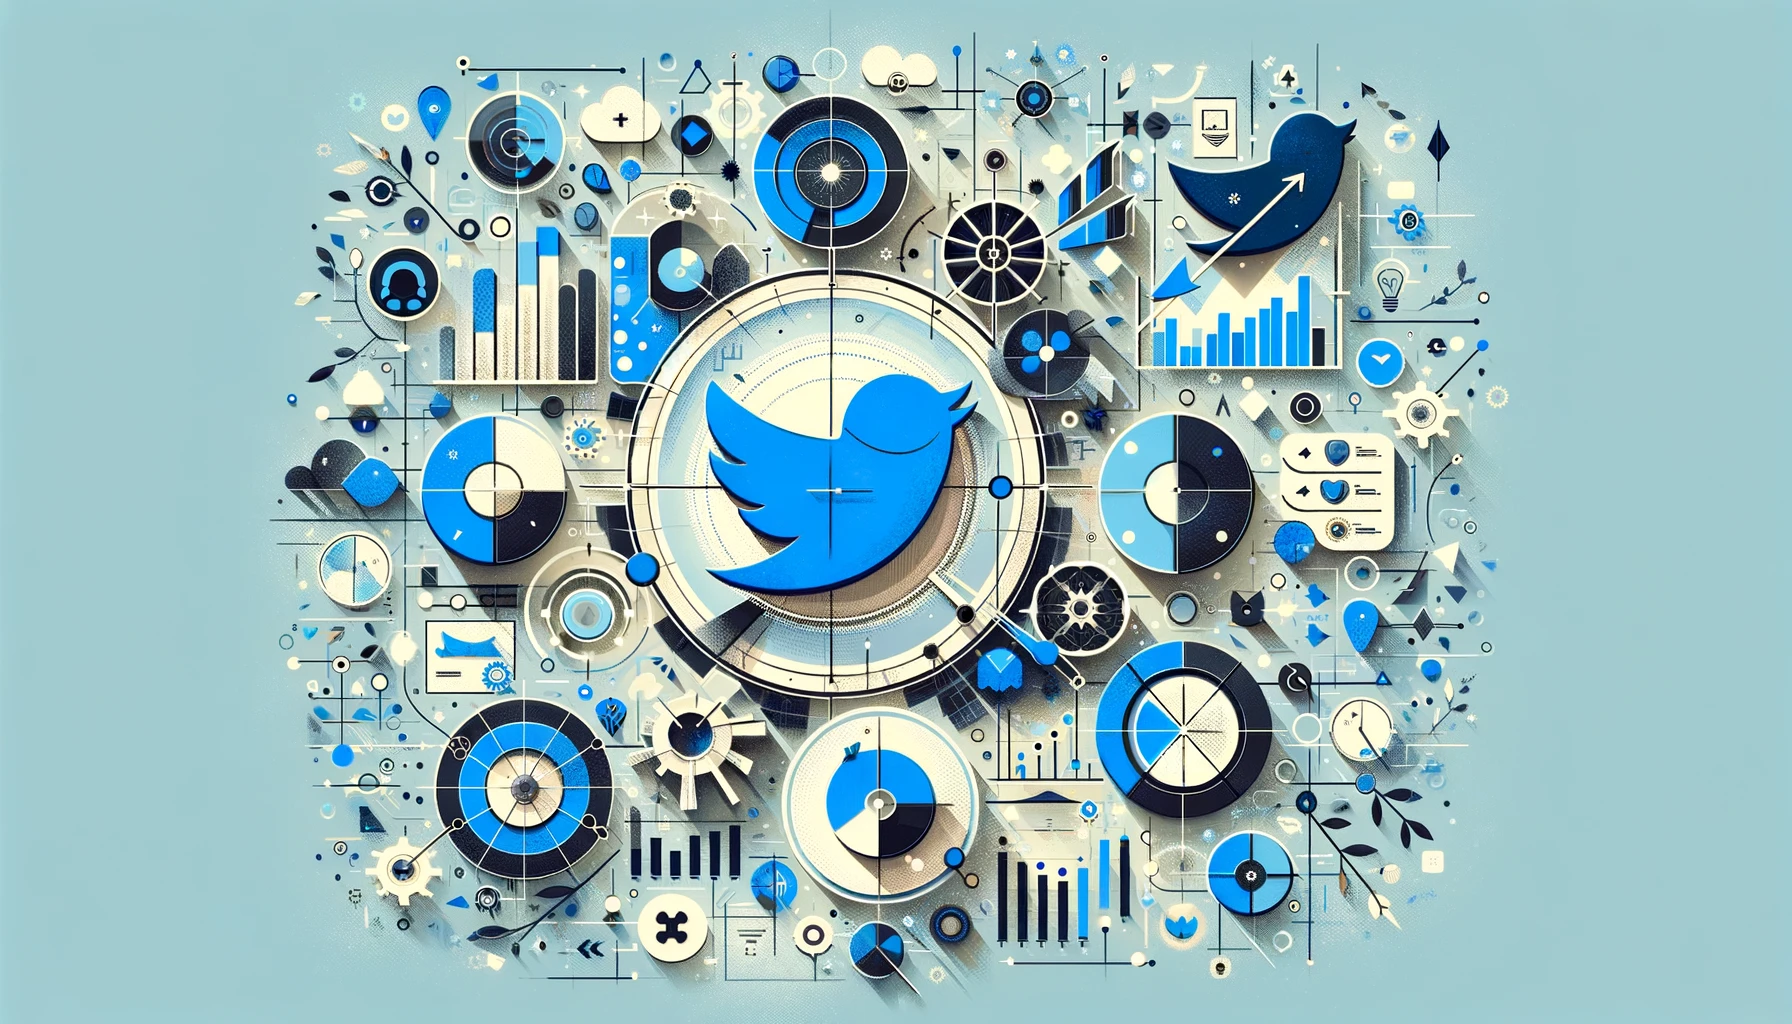 Abstract representation of Twitter Ad Analytics, featuring charts, graphs, and symbolic icons like birds analyzing data.